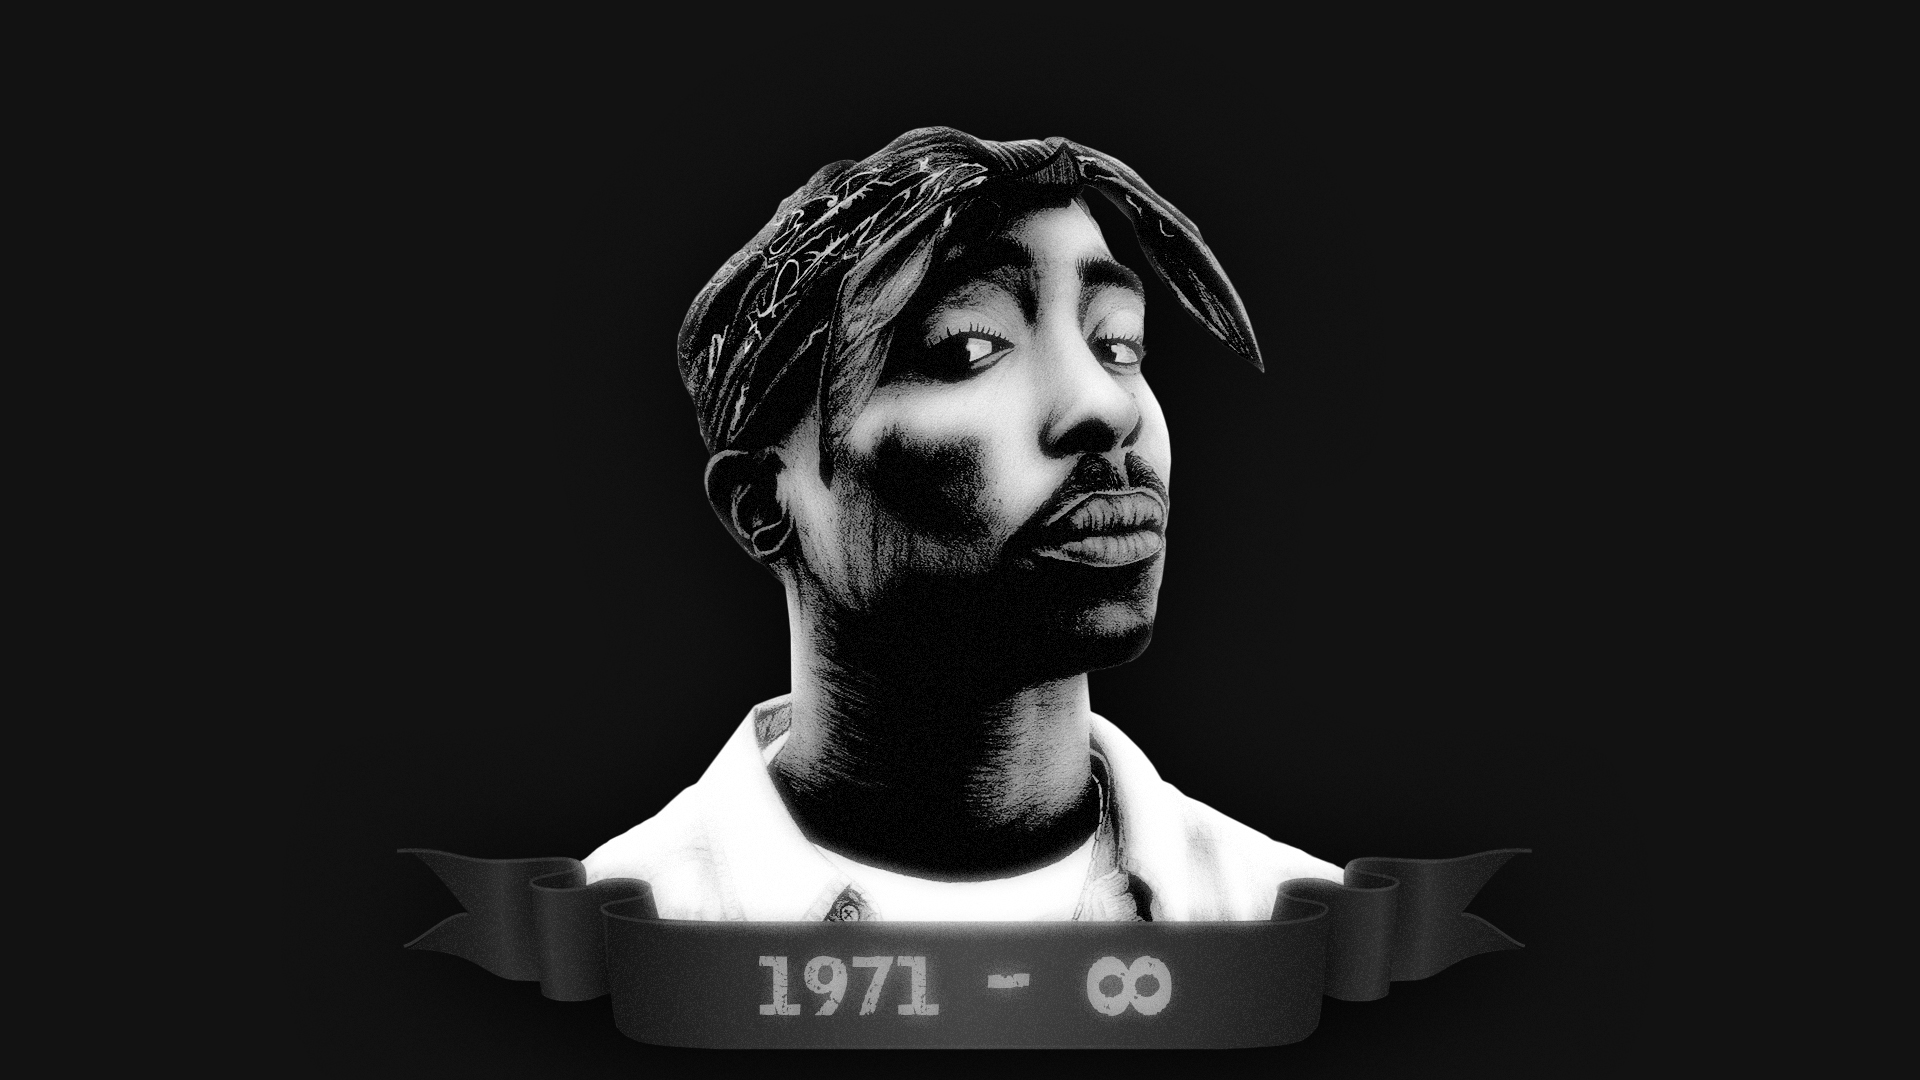 Tupac Shakur wallpaper for desktop, download free Tupac Shakur picture and background for PC